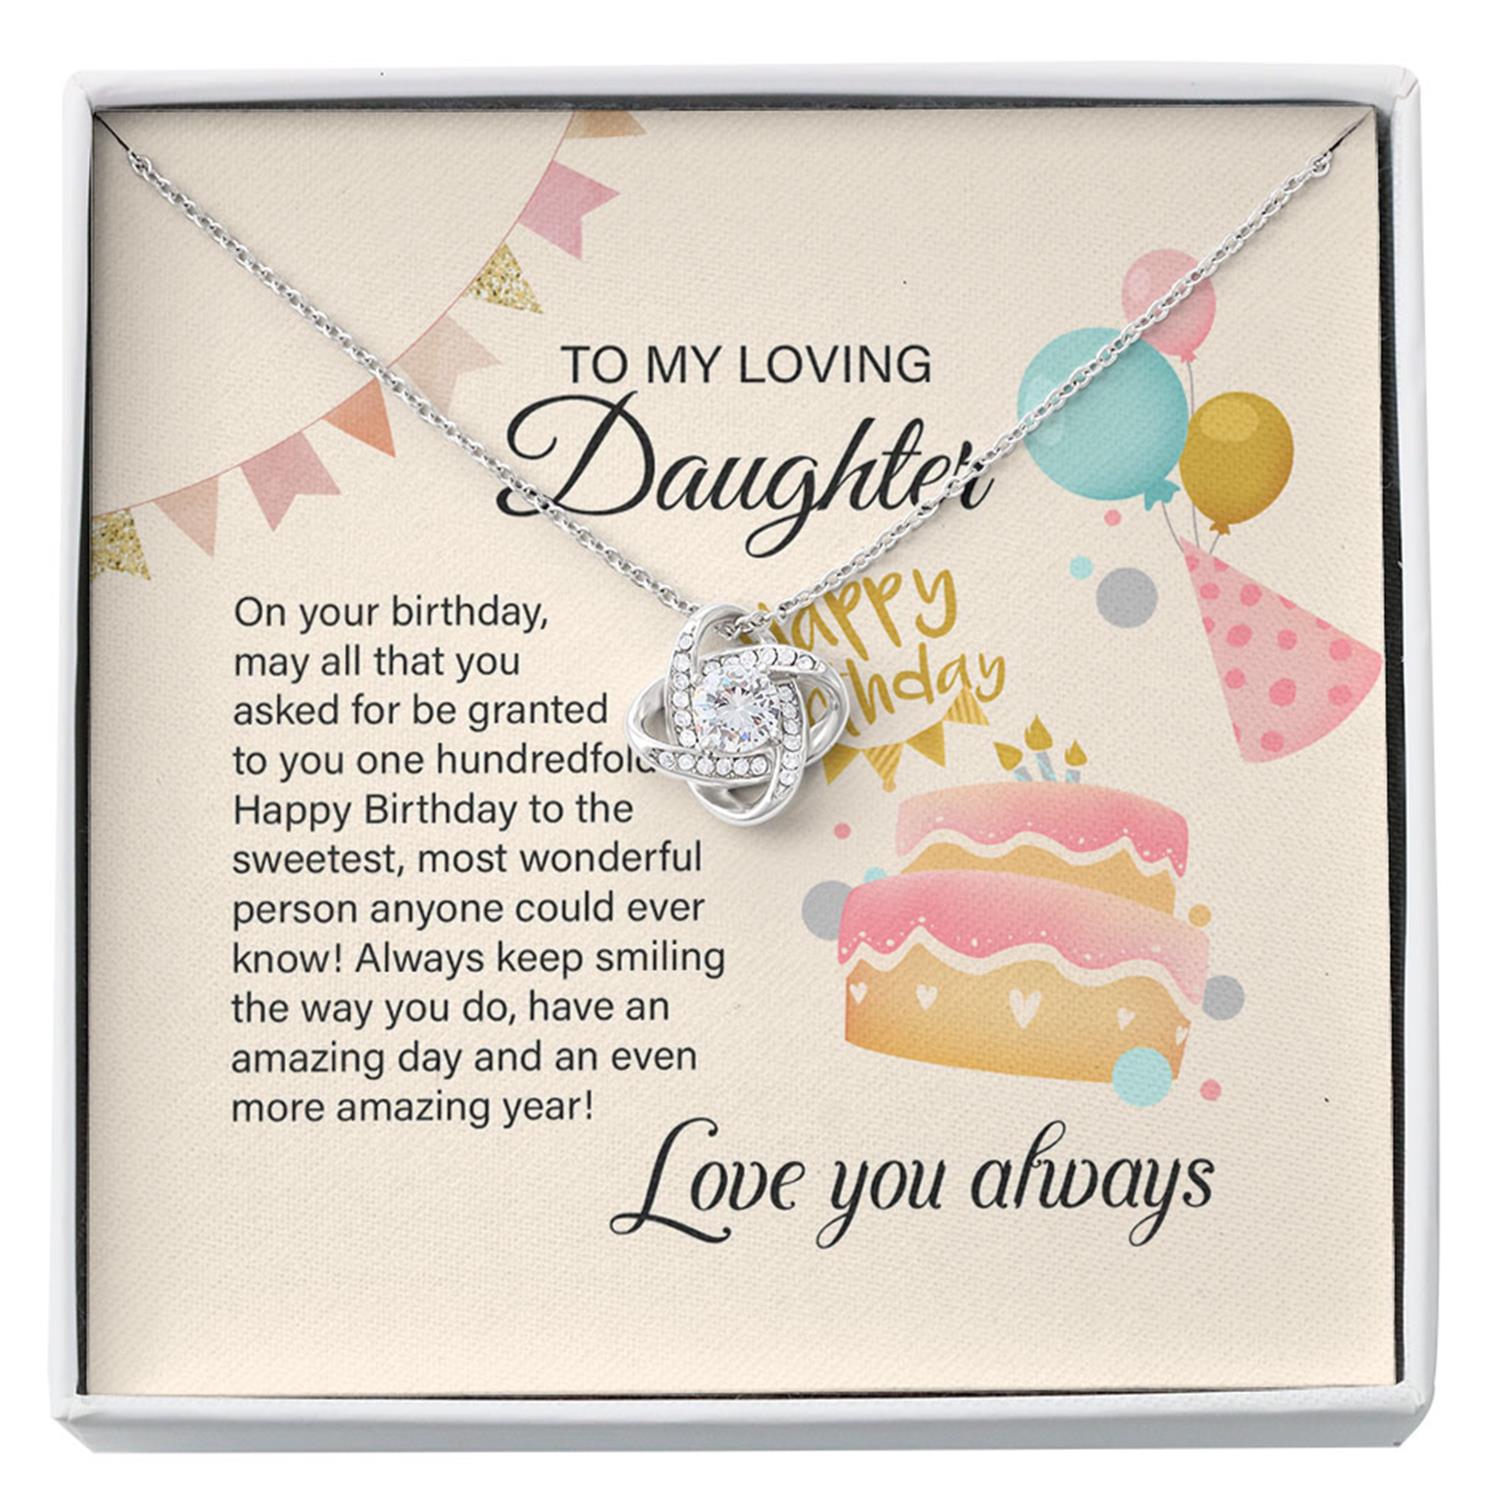 Daughter Necklace, Happy Birthday Daughter Necklace, Love Always Amazing Smile Sweet Wonderful Custom Necklace